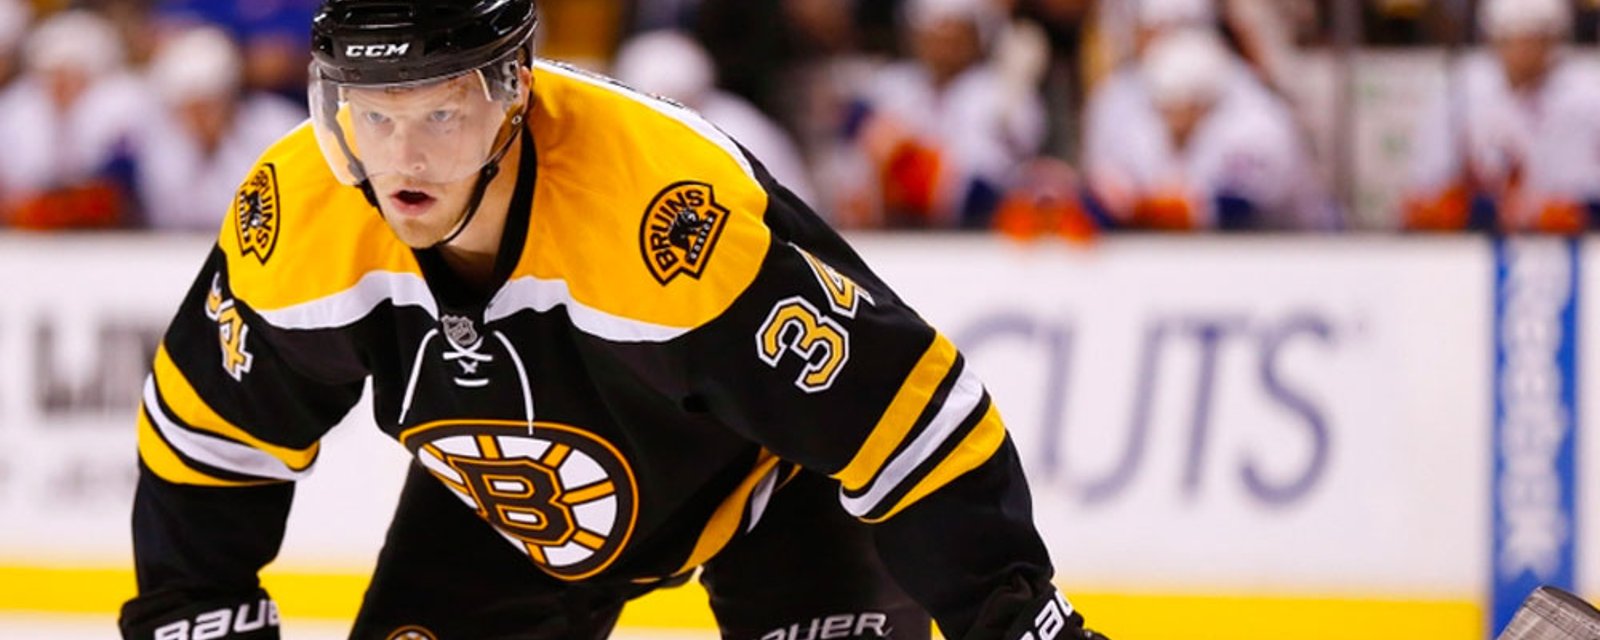 Former Bruins and Avalanche forward Carl Soderberg officially retires